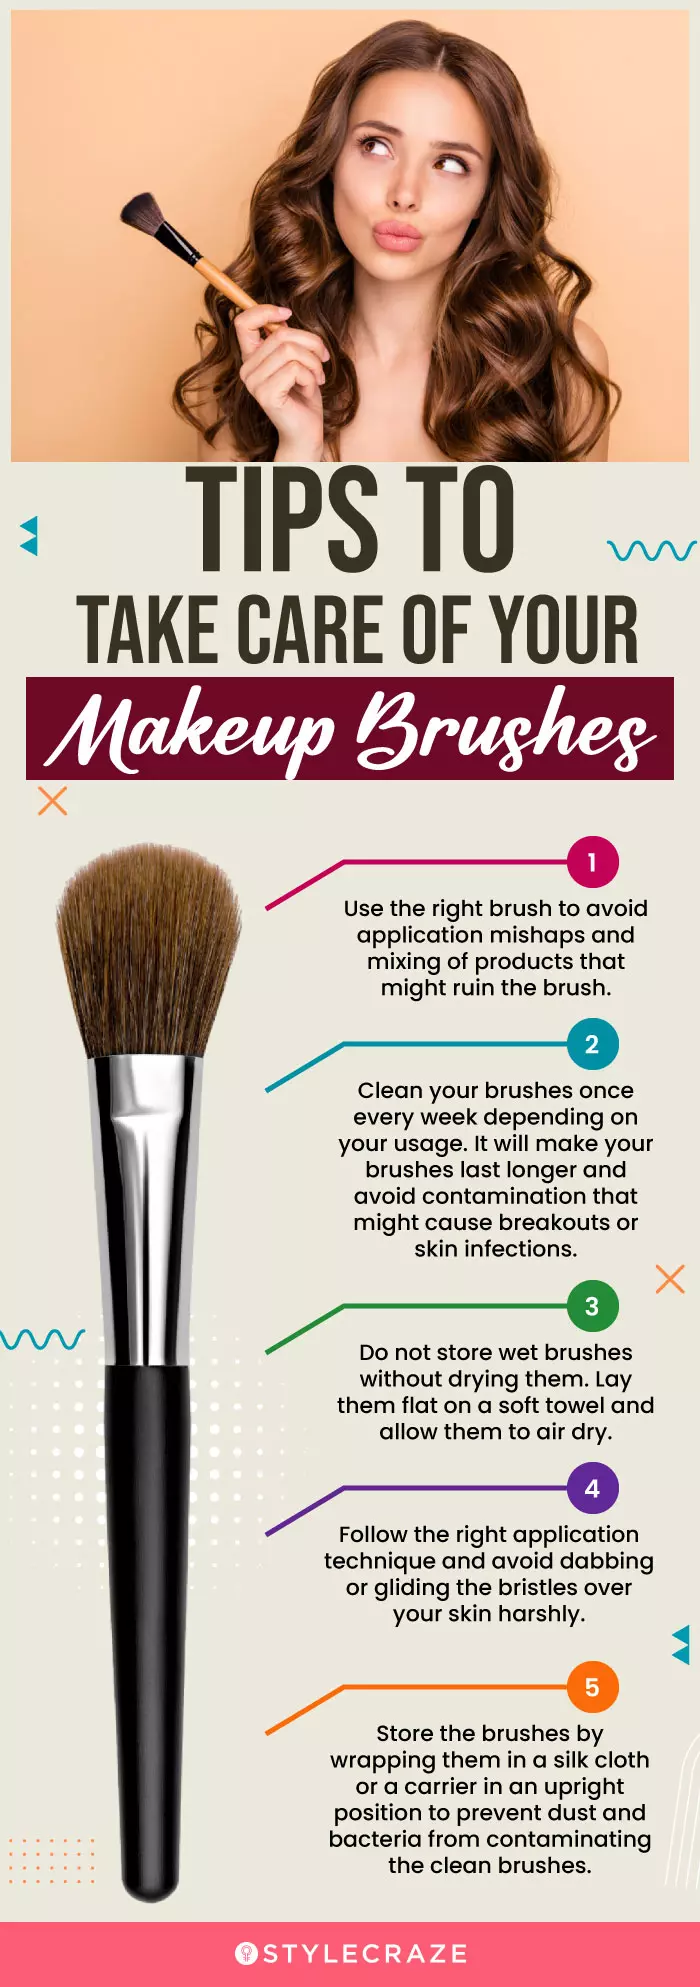 Tips To Take Care Of Your Makeup Brushes (infographic)